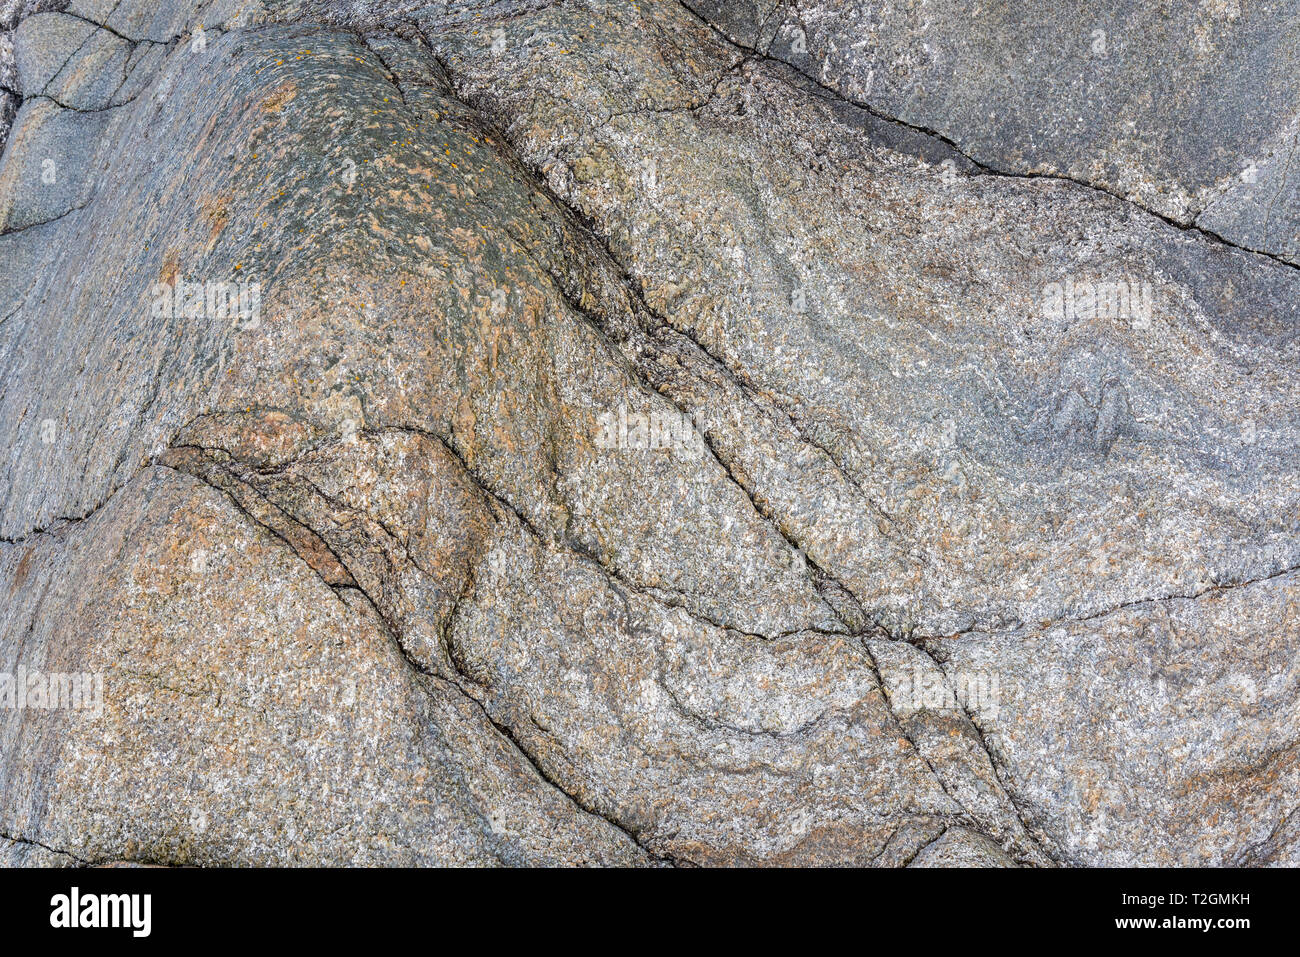 Close-up of abstract rock patterns on a beach on the Isle of Mull, Hebrides, Scotland, UK Stock Photo